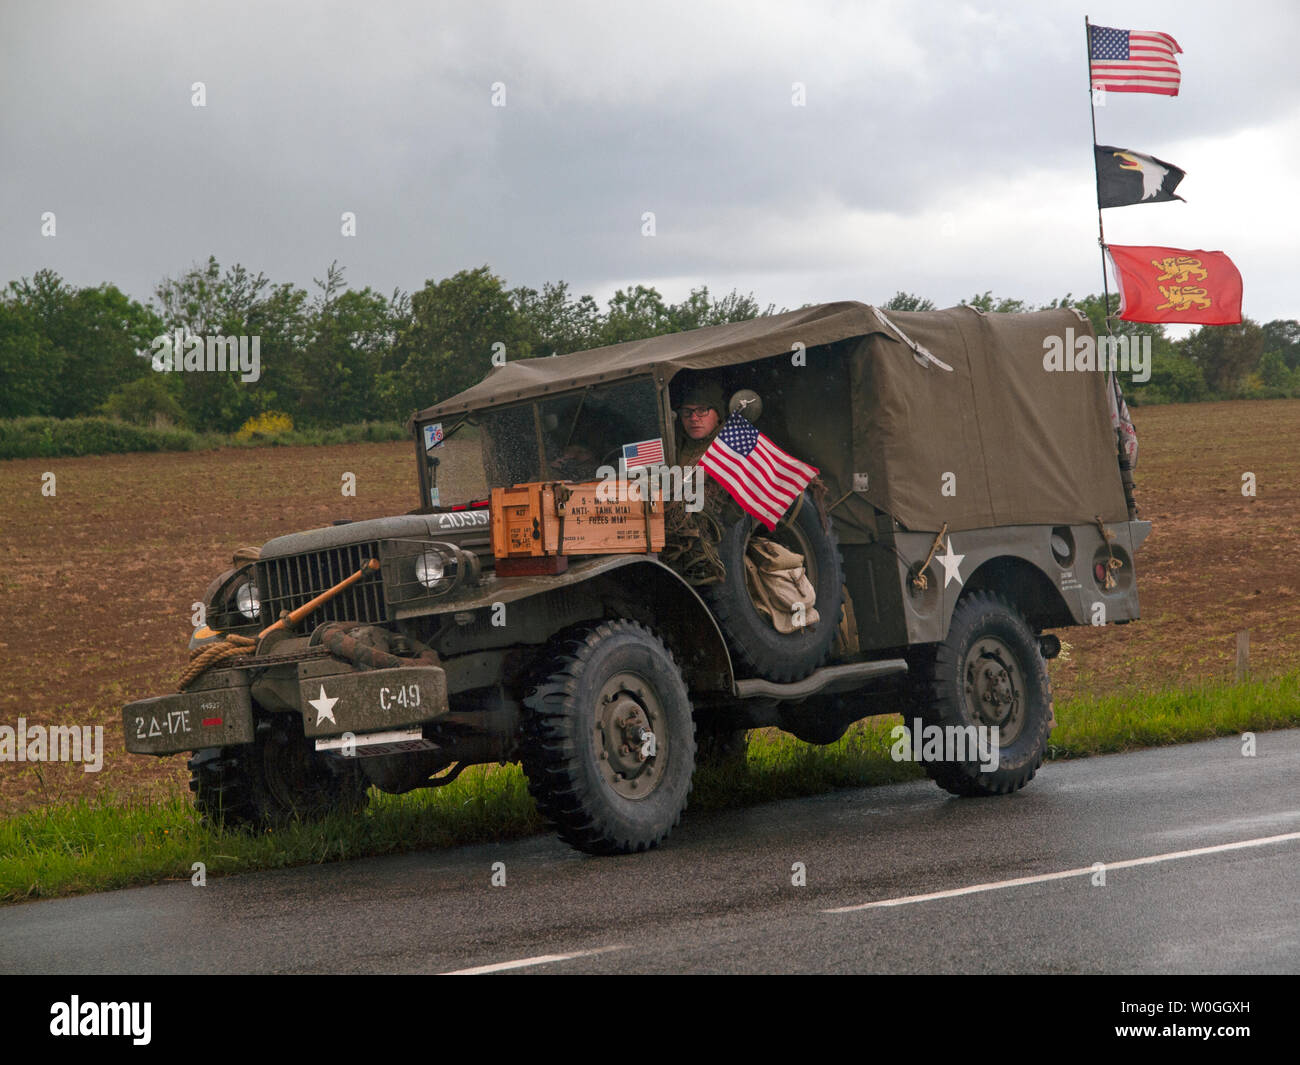 A vintage U.S. Army jeep in Normandy during the D-Day commemorations Stock Photo